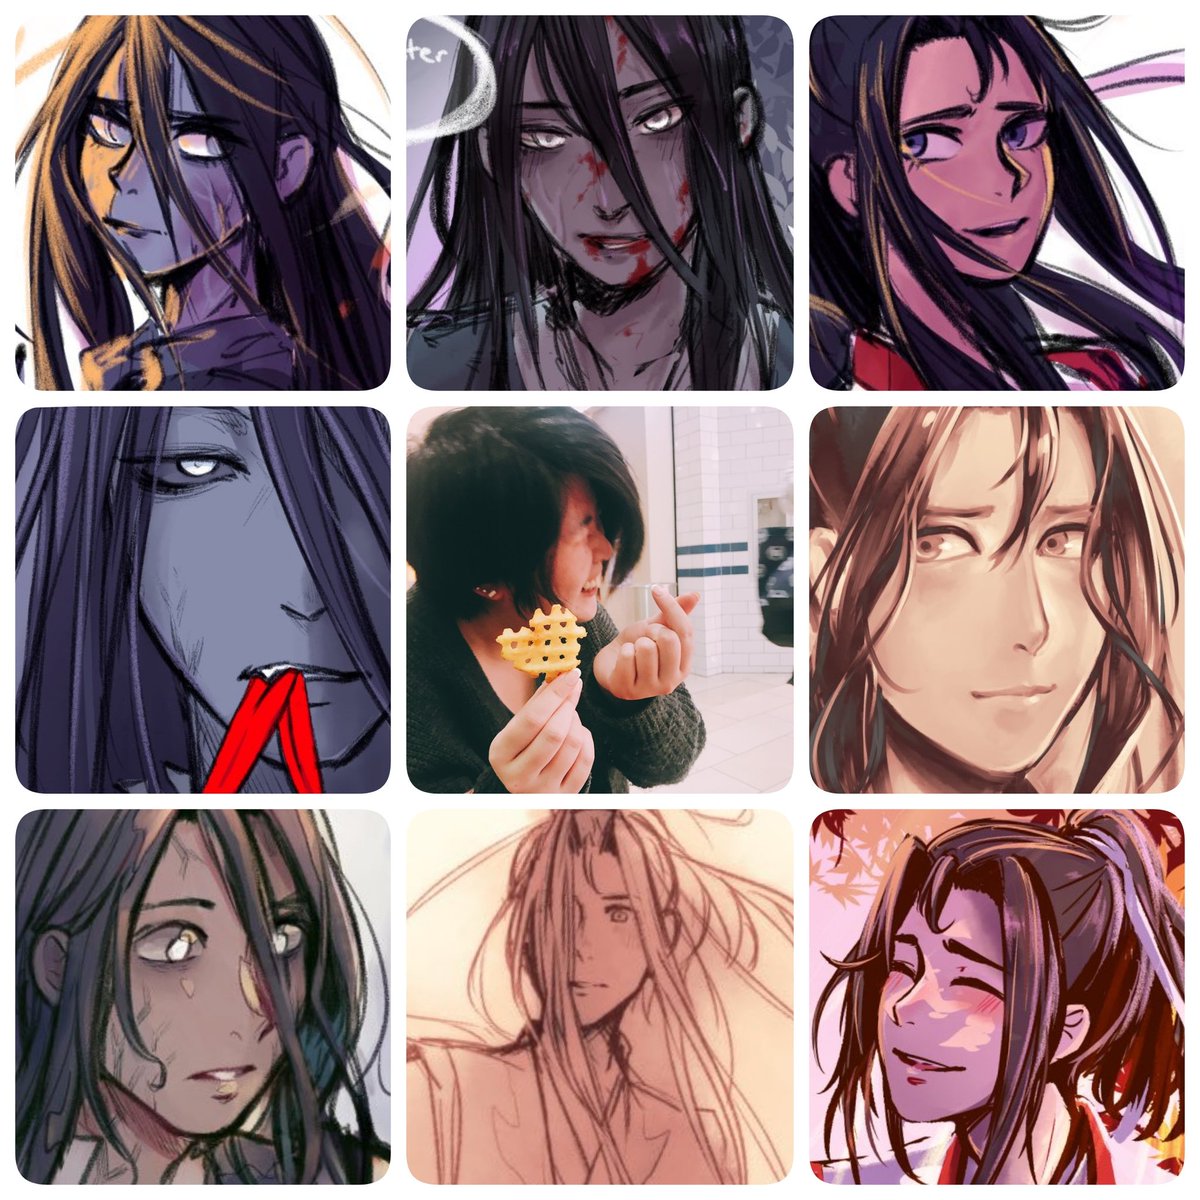 im a law abiding citizen so here's my #artvsartist featuring wen ning and  pic of me overwhelmed with emotion while holding a heart-shaped waffle fry 